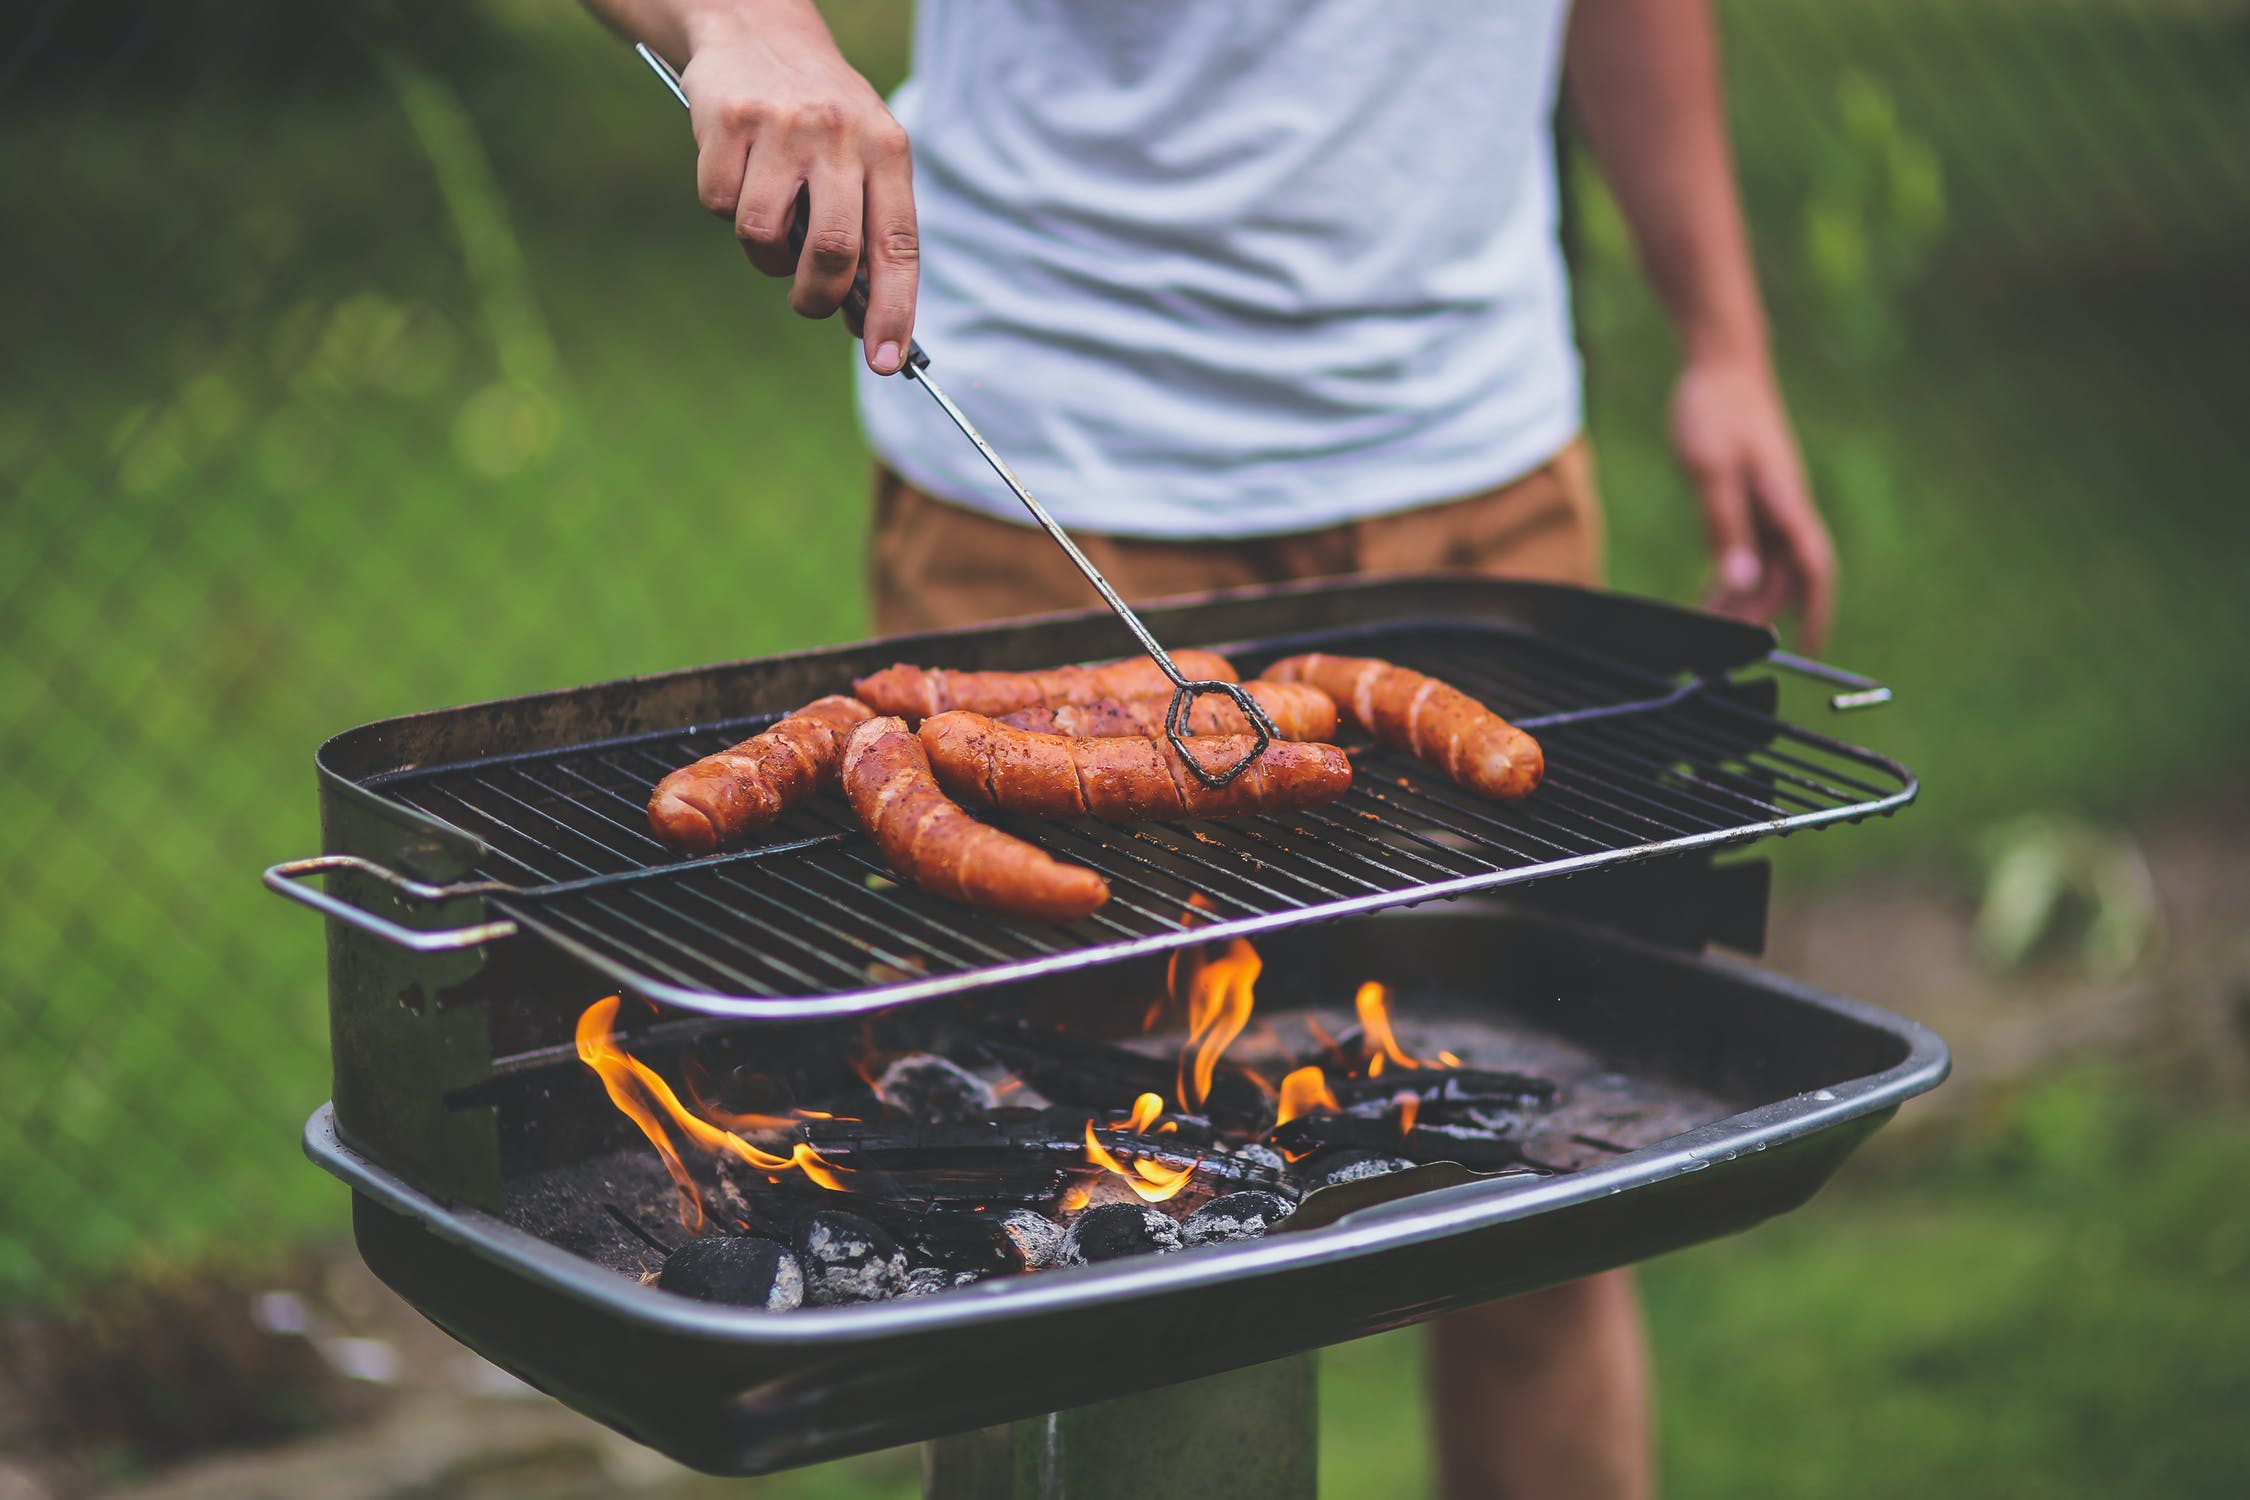 How to Clean a Barbecue, Kitchen and Garden